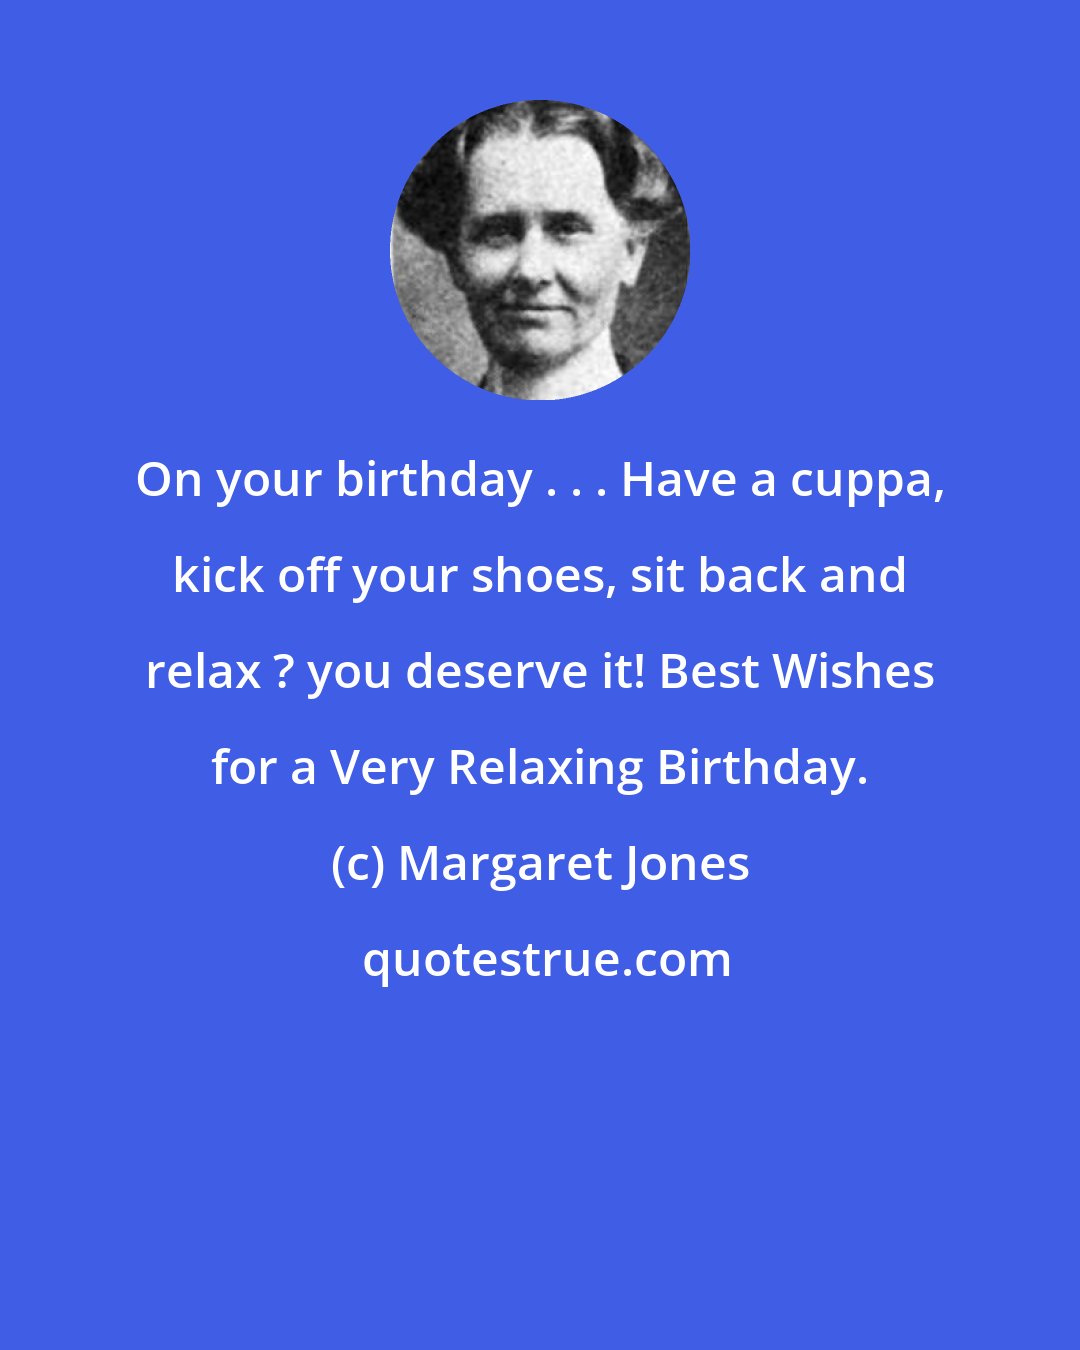 Margaret Jones: On your birthday . . . Have a cuppa, kick off your shoes, sit back and relax ? you deserve it! Best Wishes for a Very Relaxing Birthday.